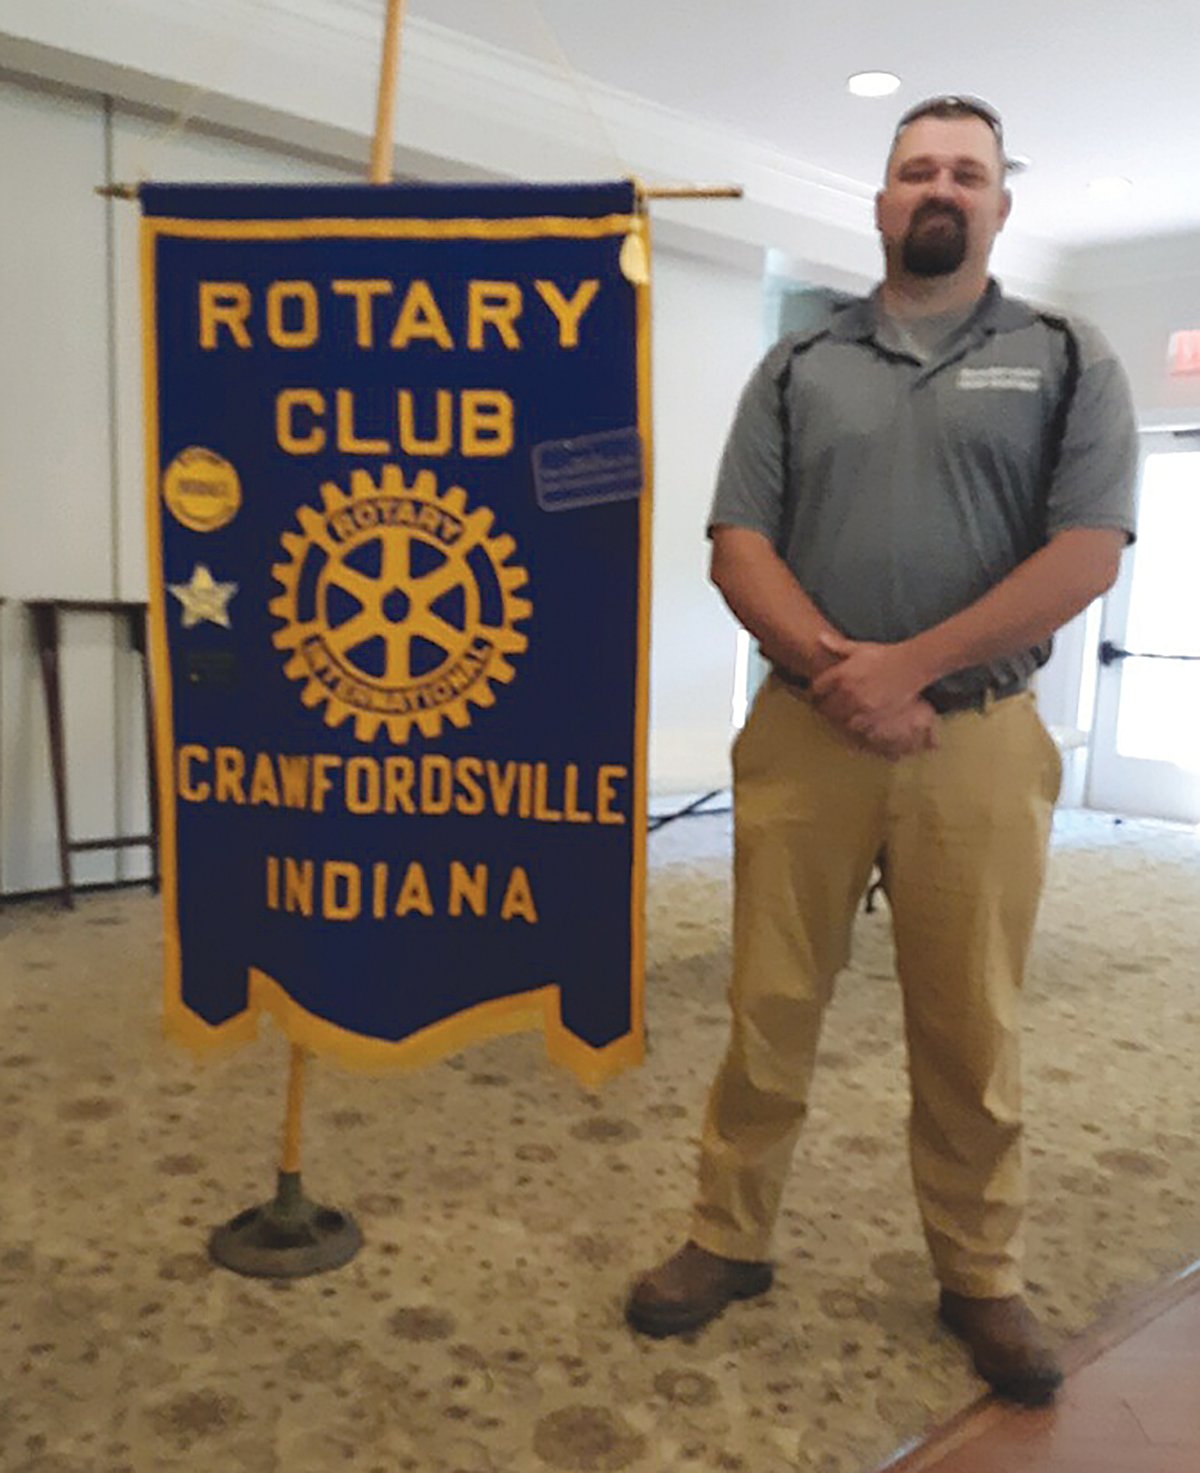 Jake Lough, director of the Montgomery County Highway Department, spoke to members of the Crawfordsville Rotary Club on Aug. 17. He is a county native and graduated from North Montgomery High School in 2005 and Vincennes University in 2007. He has worked for the highway department for 14 years. He shared a lot of information concerning the county roads. There are 800 miles of roads in the county for which the highway department is responsible. There are 500 miles of paved and 300 miles of gravel roads. Larger farm machinery, heavier weights and increased traffic causes more wear and tear on the roads. Some roads were built 60 or 70 years ago. Chip seal is the main preservation of the roads. In 2000, there were 50 employees in the department. Today there are 33 with some openings. The department is funded only through the gasoline tax. to meet “best practices” for road maintenance the department would need $2.4 million additional to the current budget.